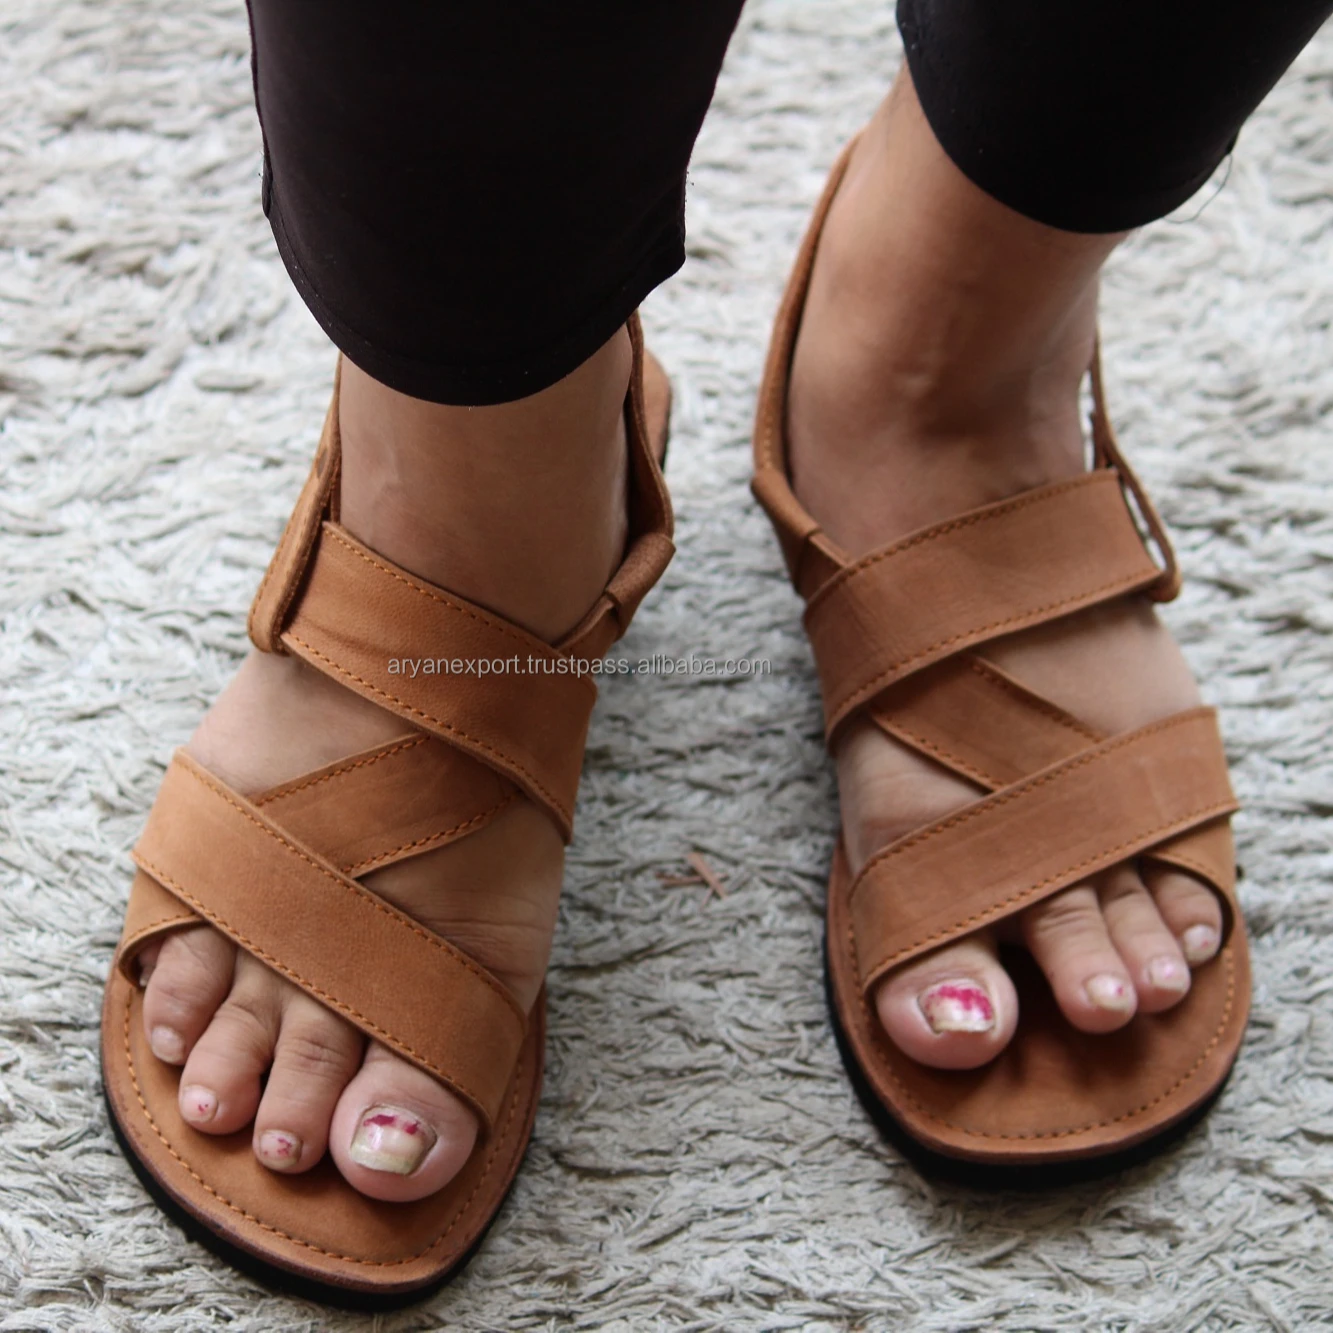 Tarifa Sandals Tan Leather- Spanish womens leather shoes online